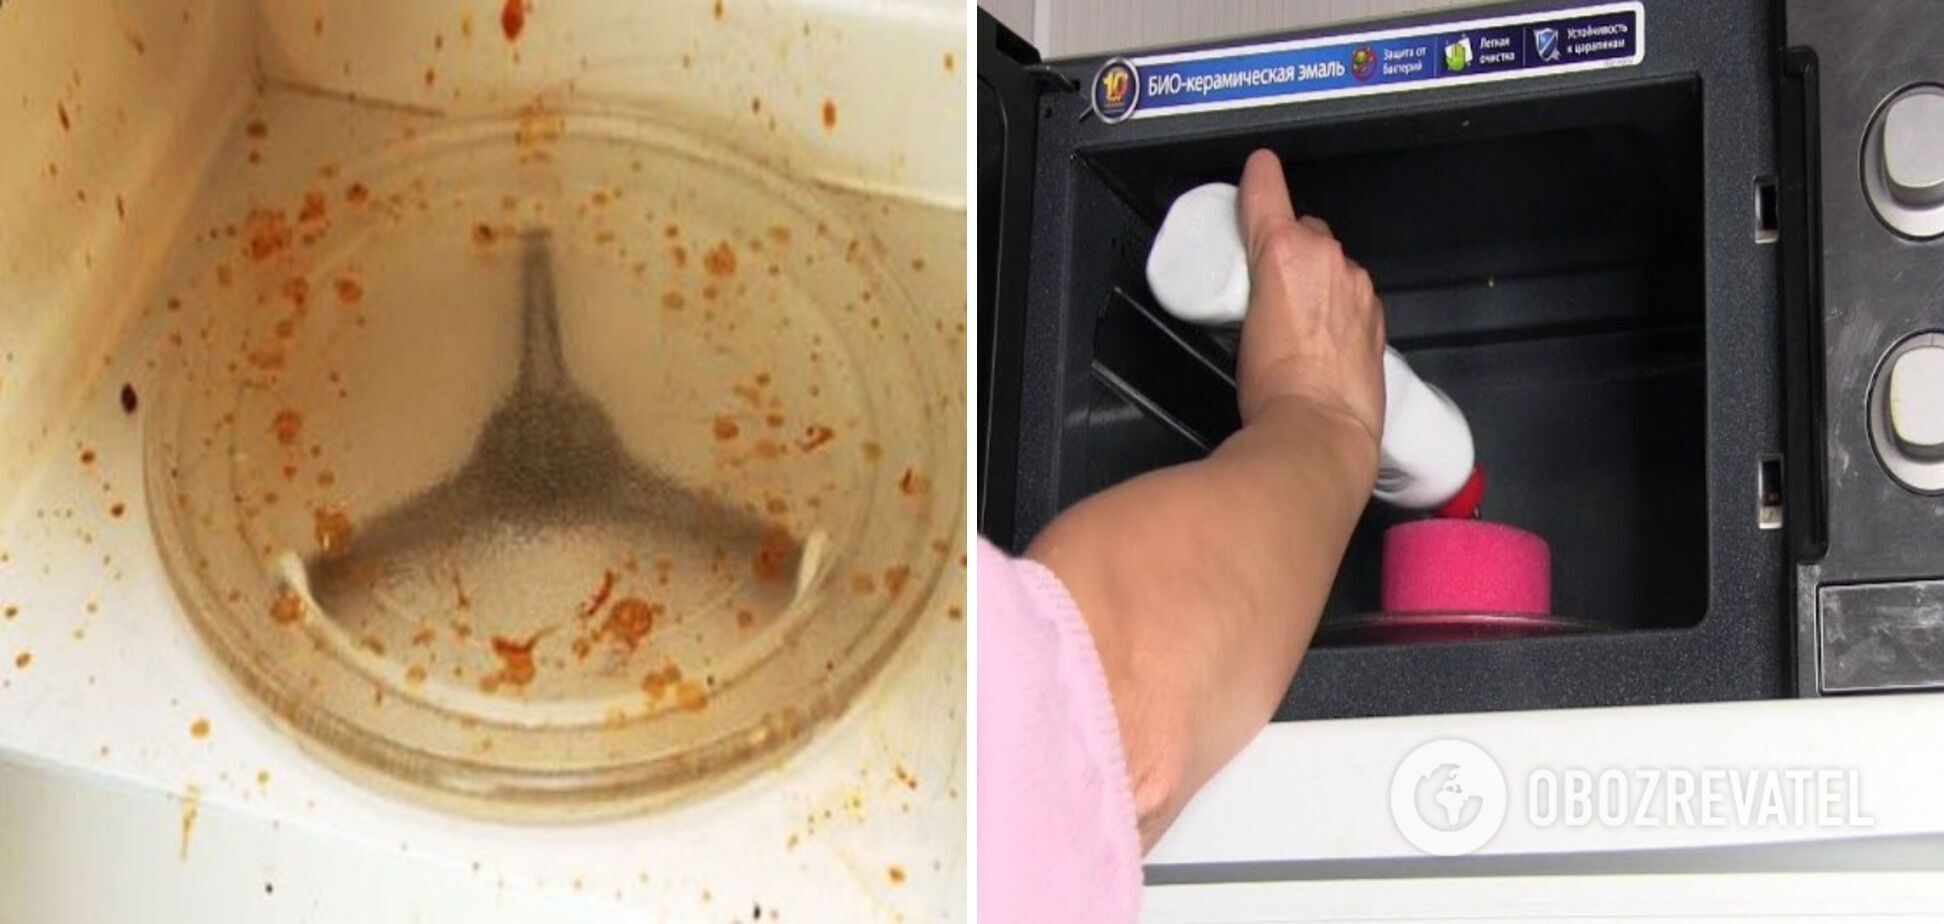 How to clean the microwave with citric acid